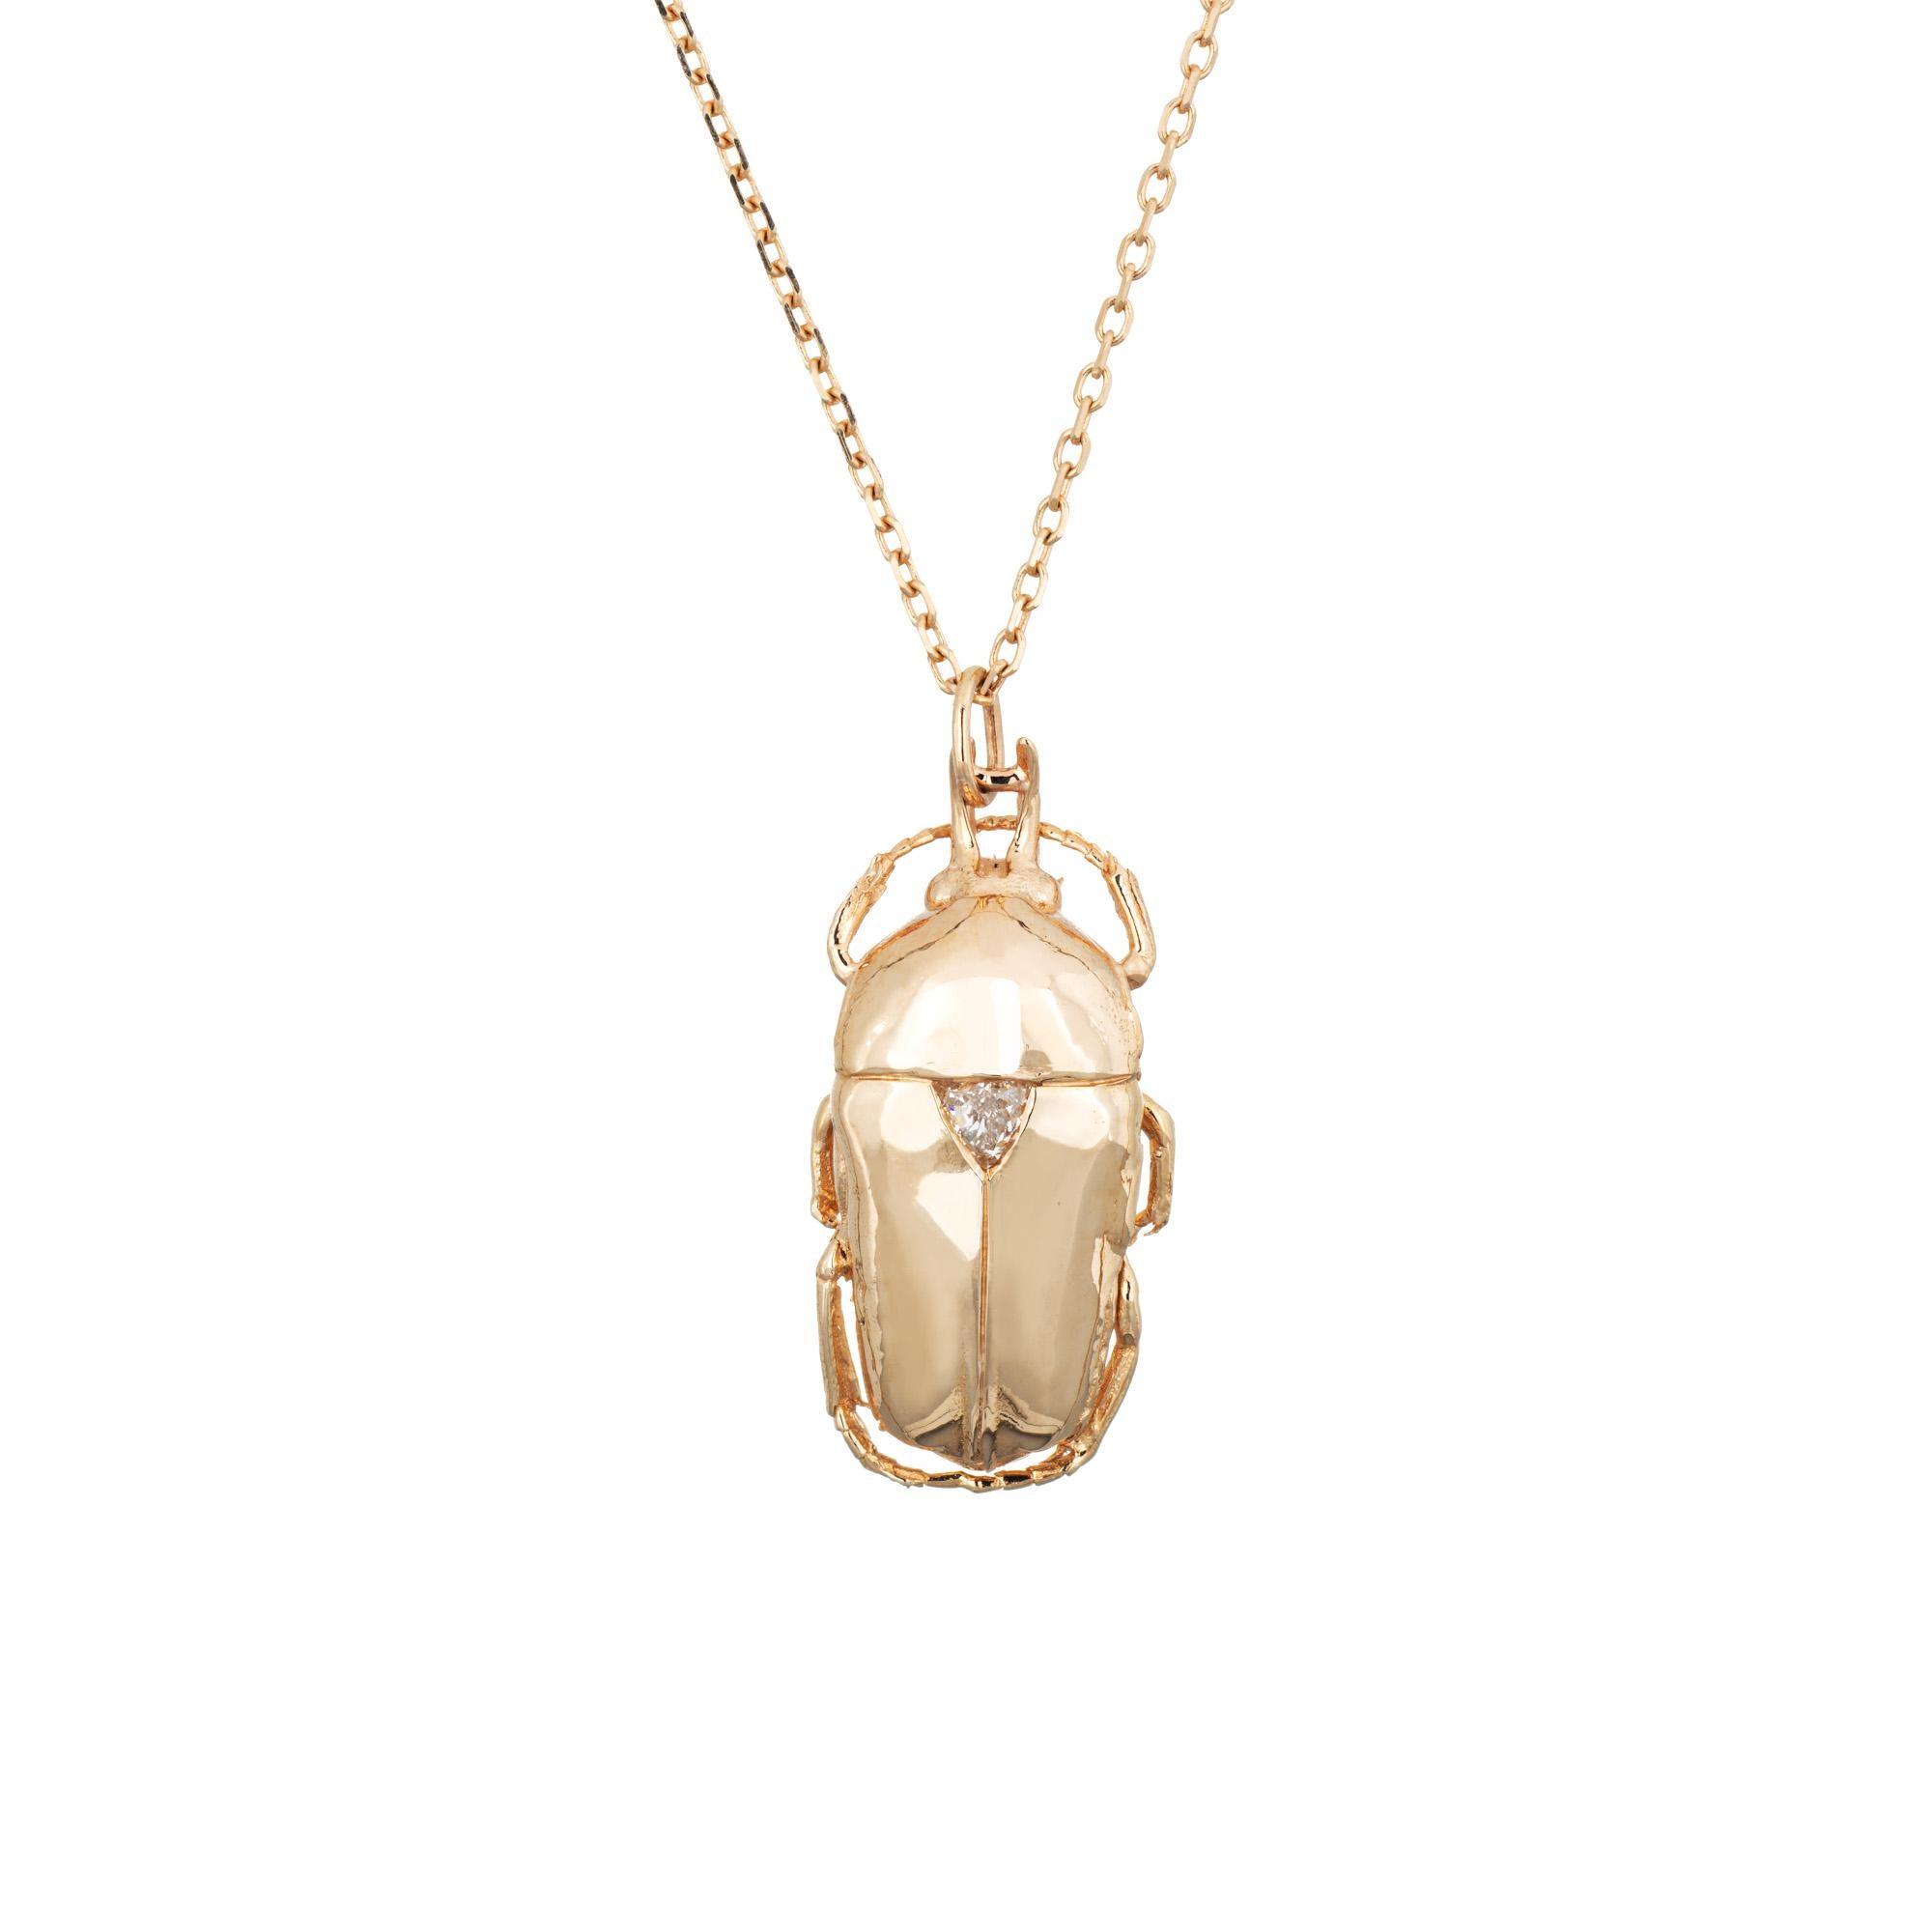 Contemporary Celine Daoust Trillion Diamond Scarab Necklace 14k Yellow Gold Estate Jewelry